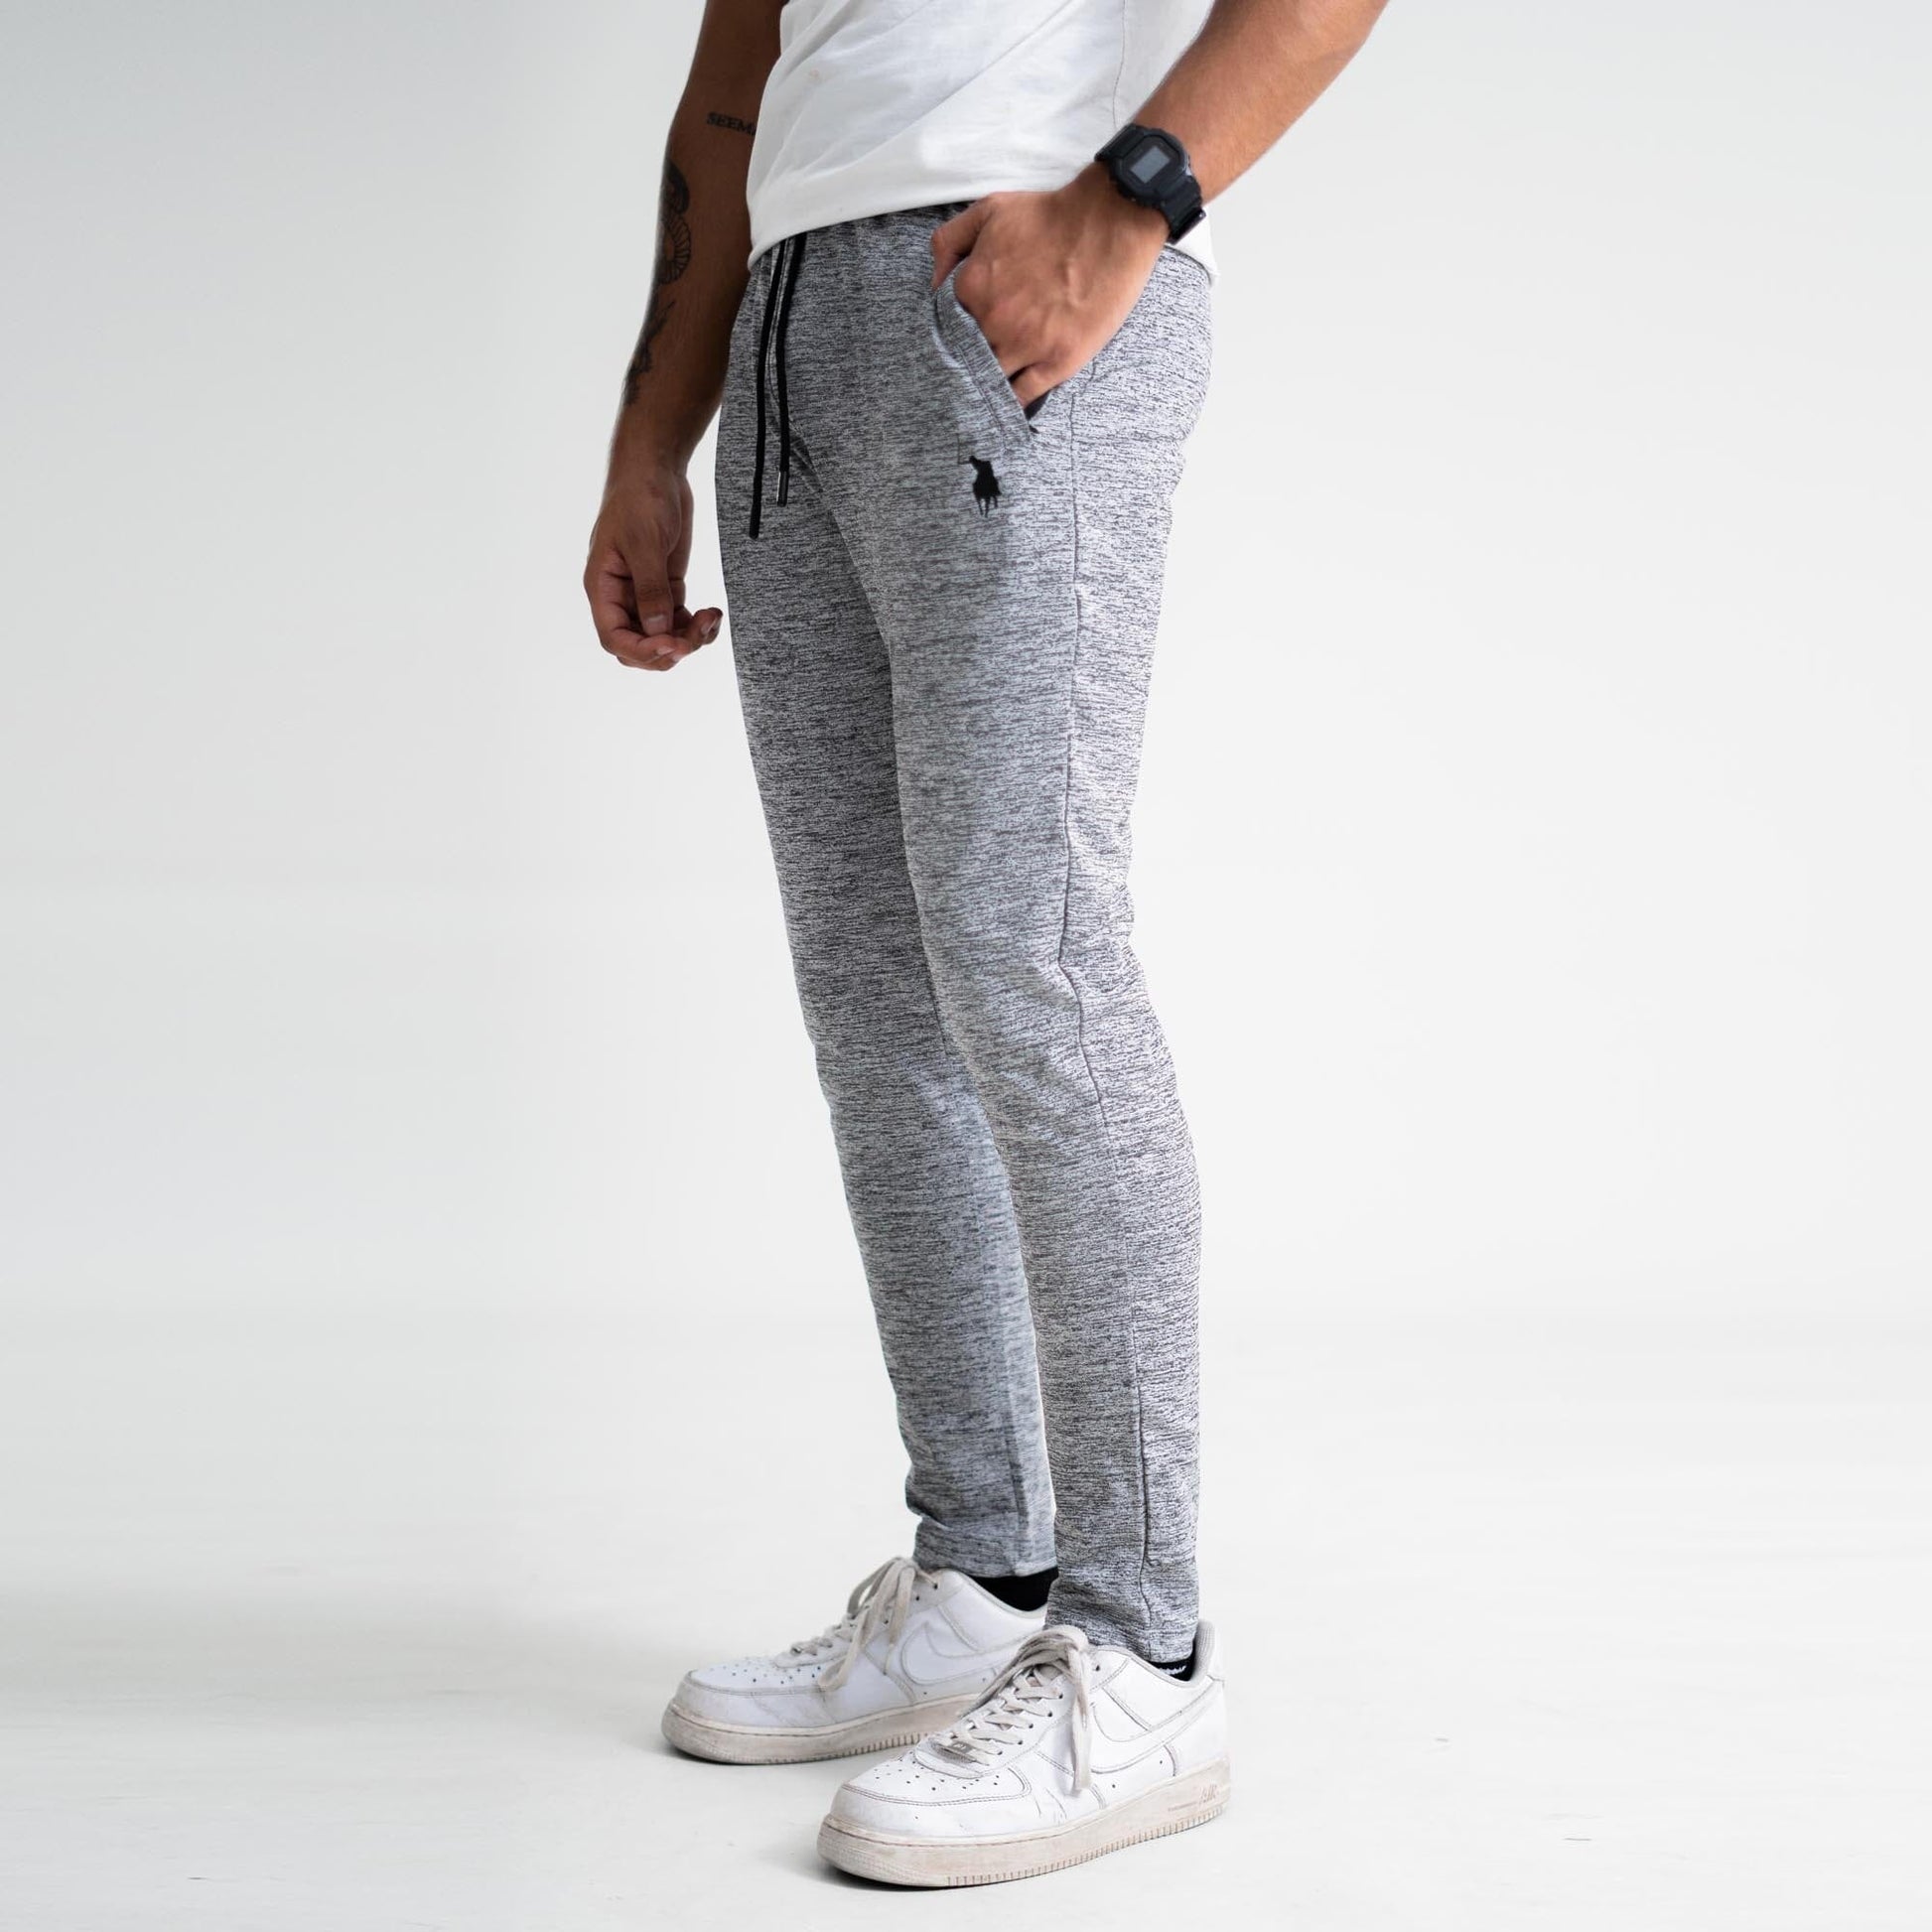 Polo Athletica Men's Slim-Fit Gym Joggers with Pony Print